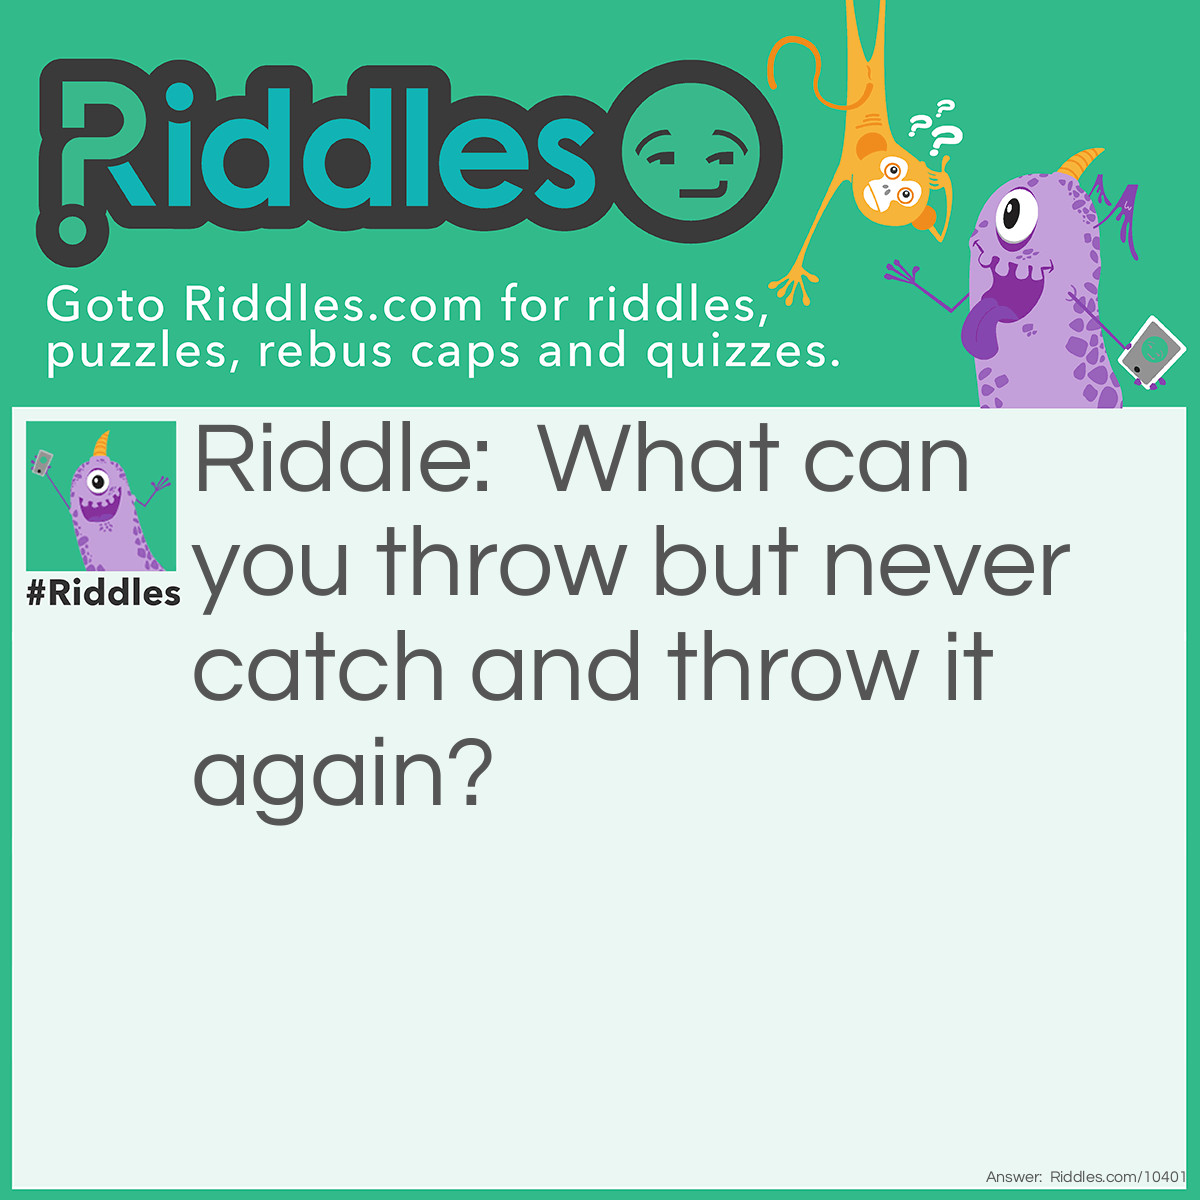 Riddle: What can you throw but never catch and throw it again? Answer: A tantrum!